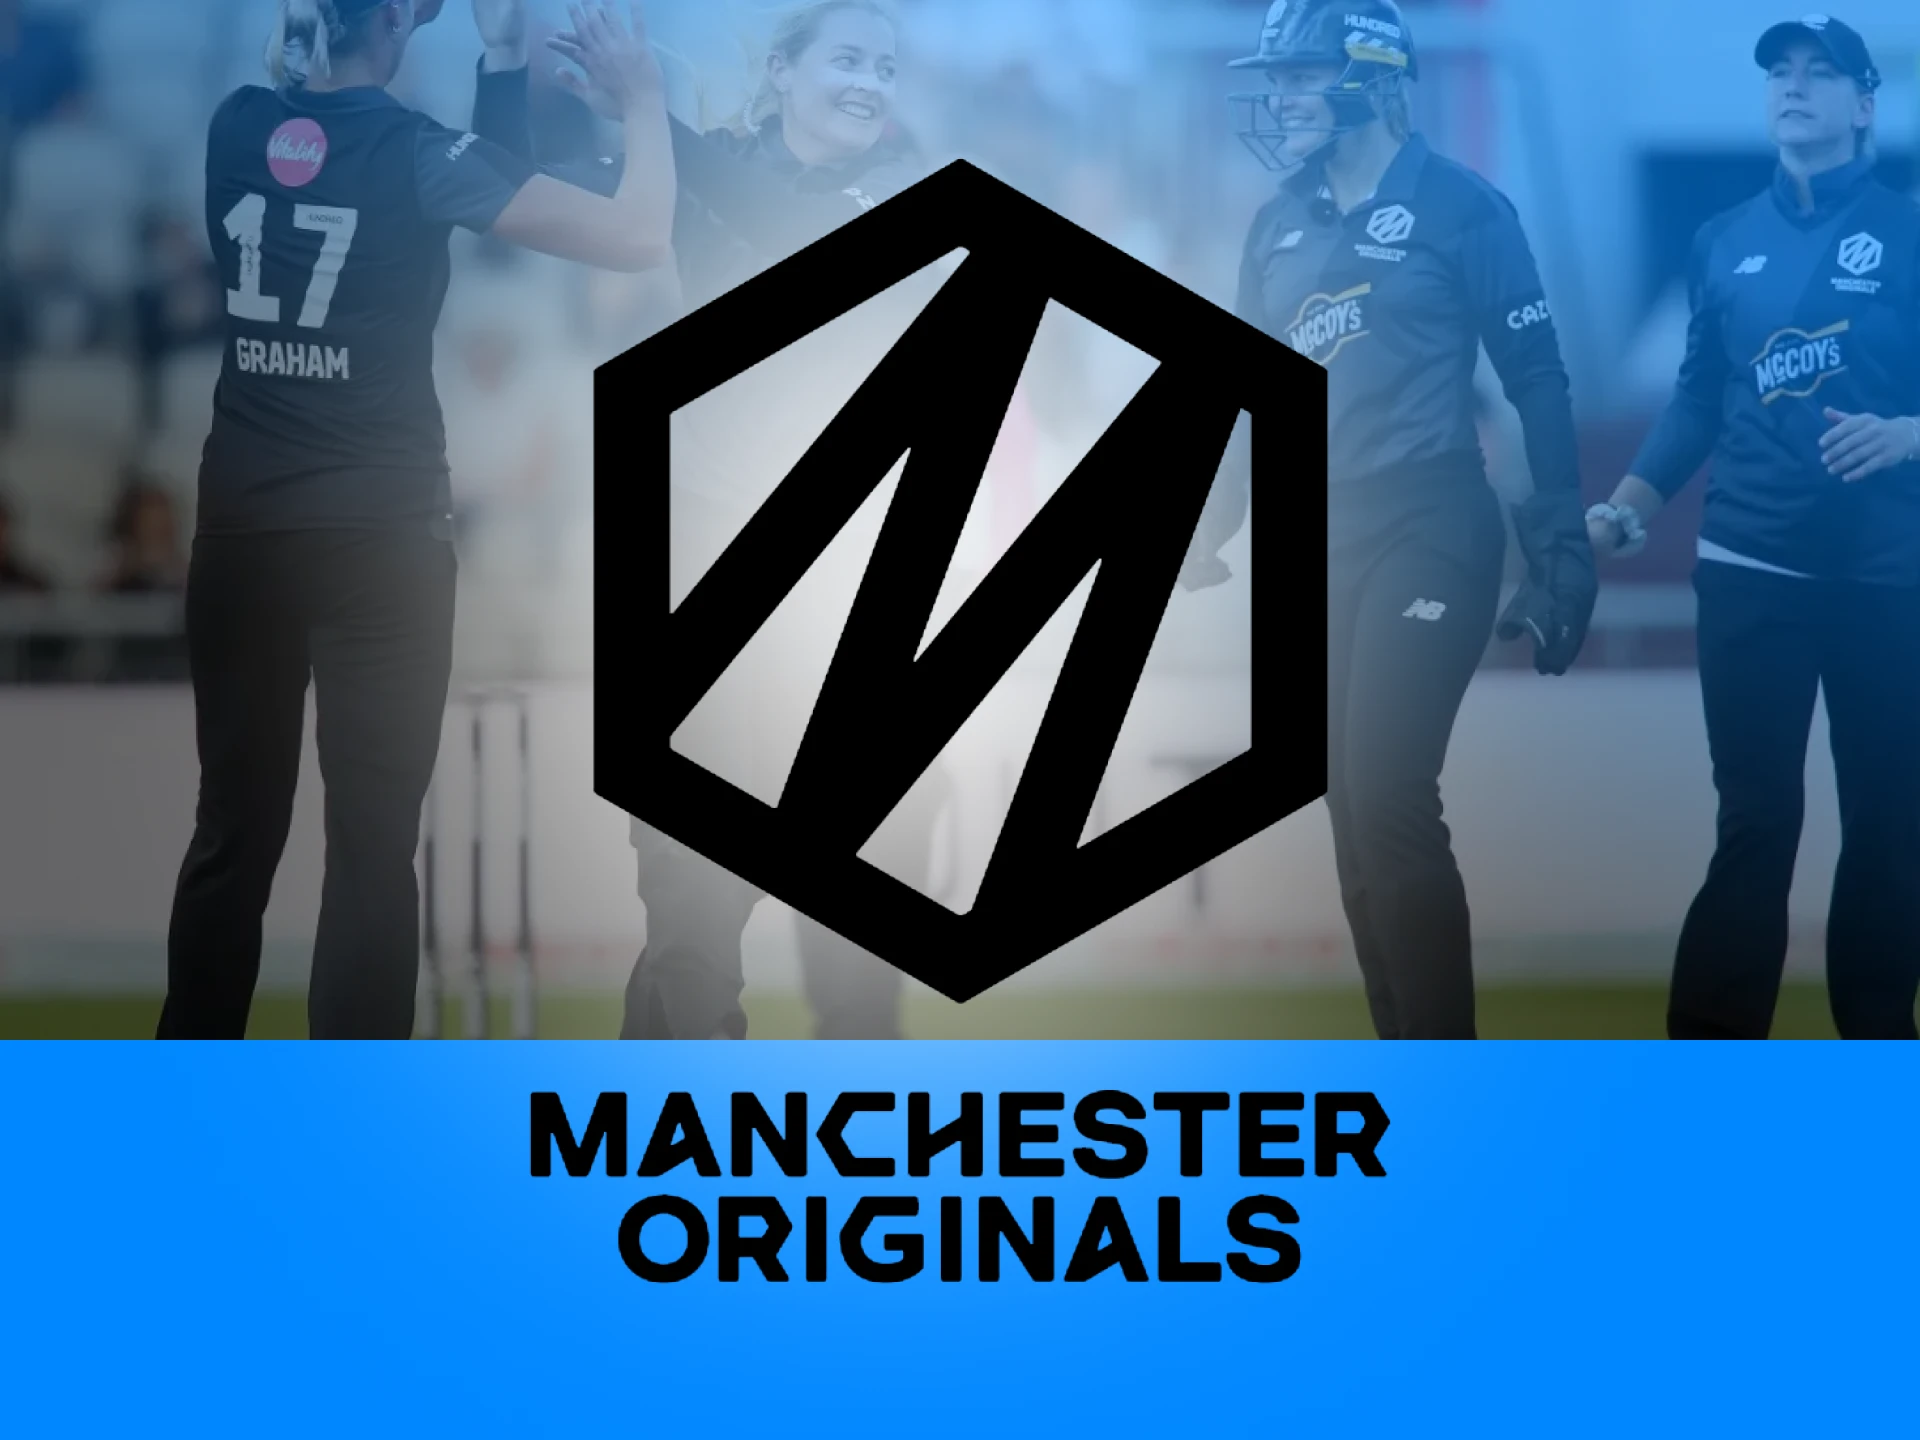 Win a lot of money by betting on Manchester Originals.